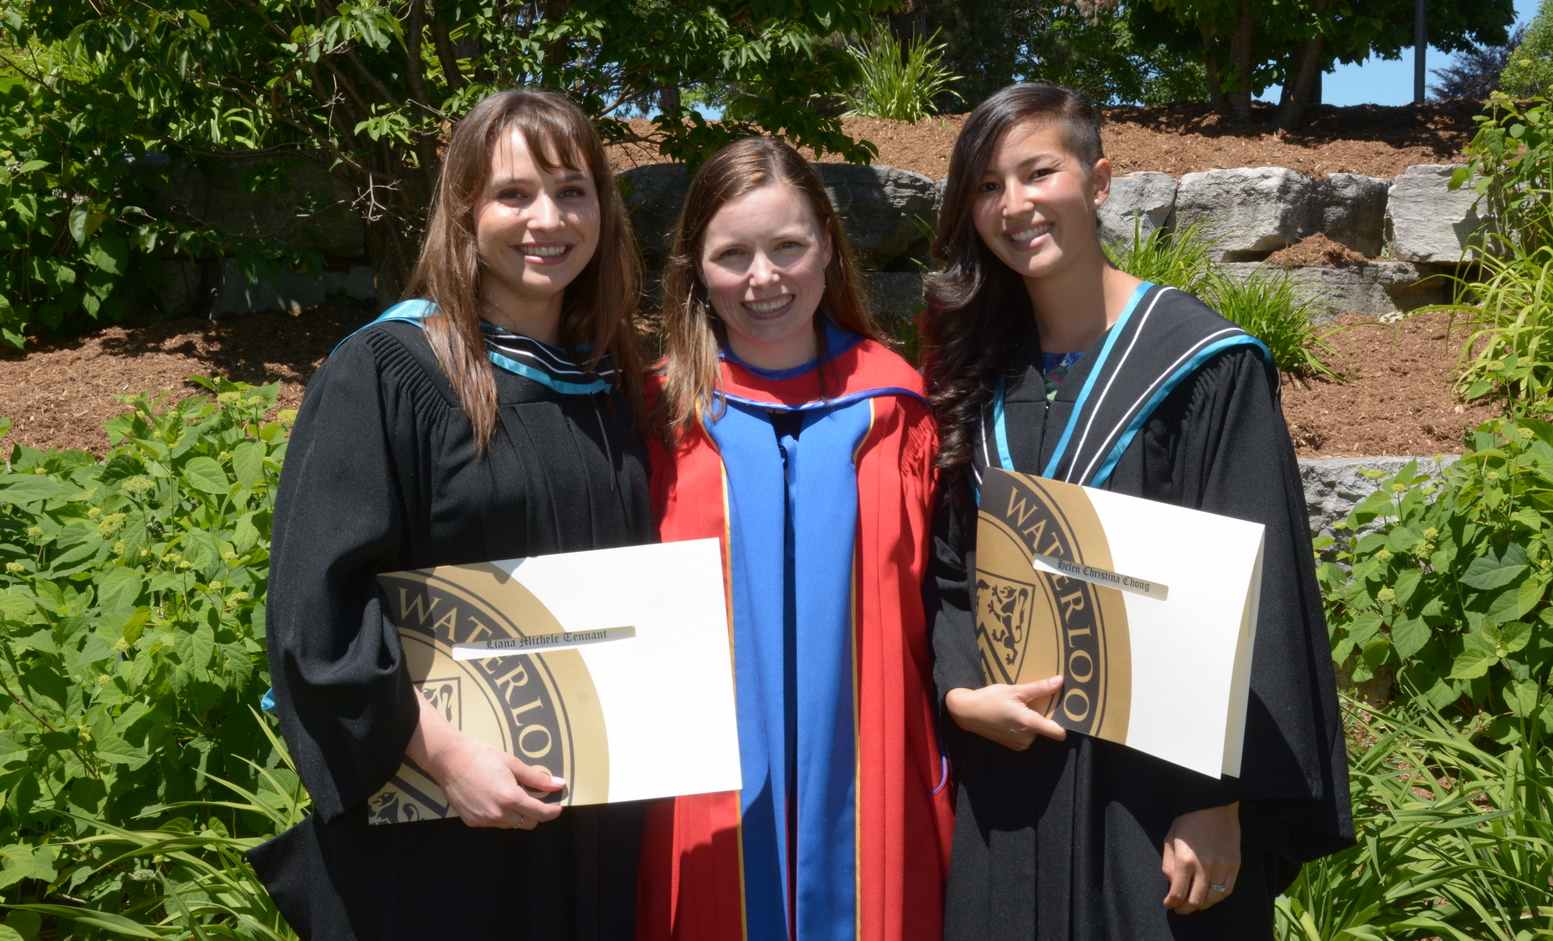 Helen Chong, Liana Tennant, and Stacey Acker in ceremonial robes